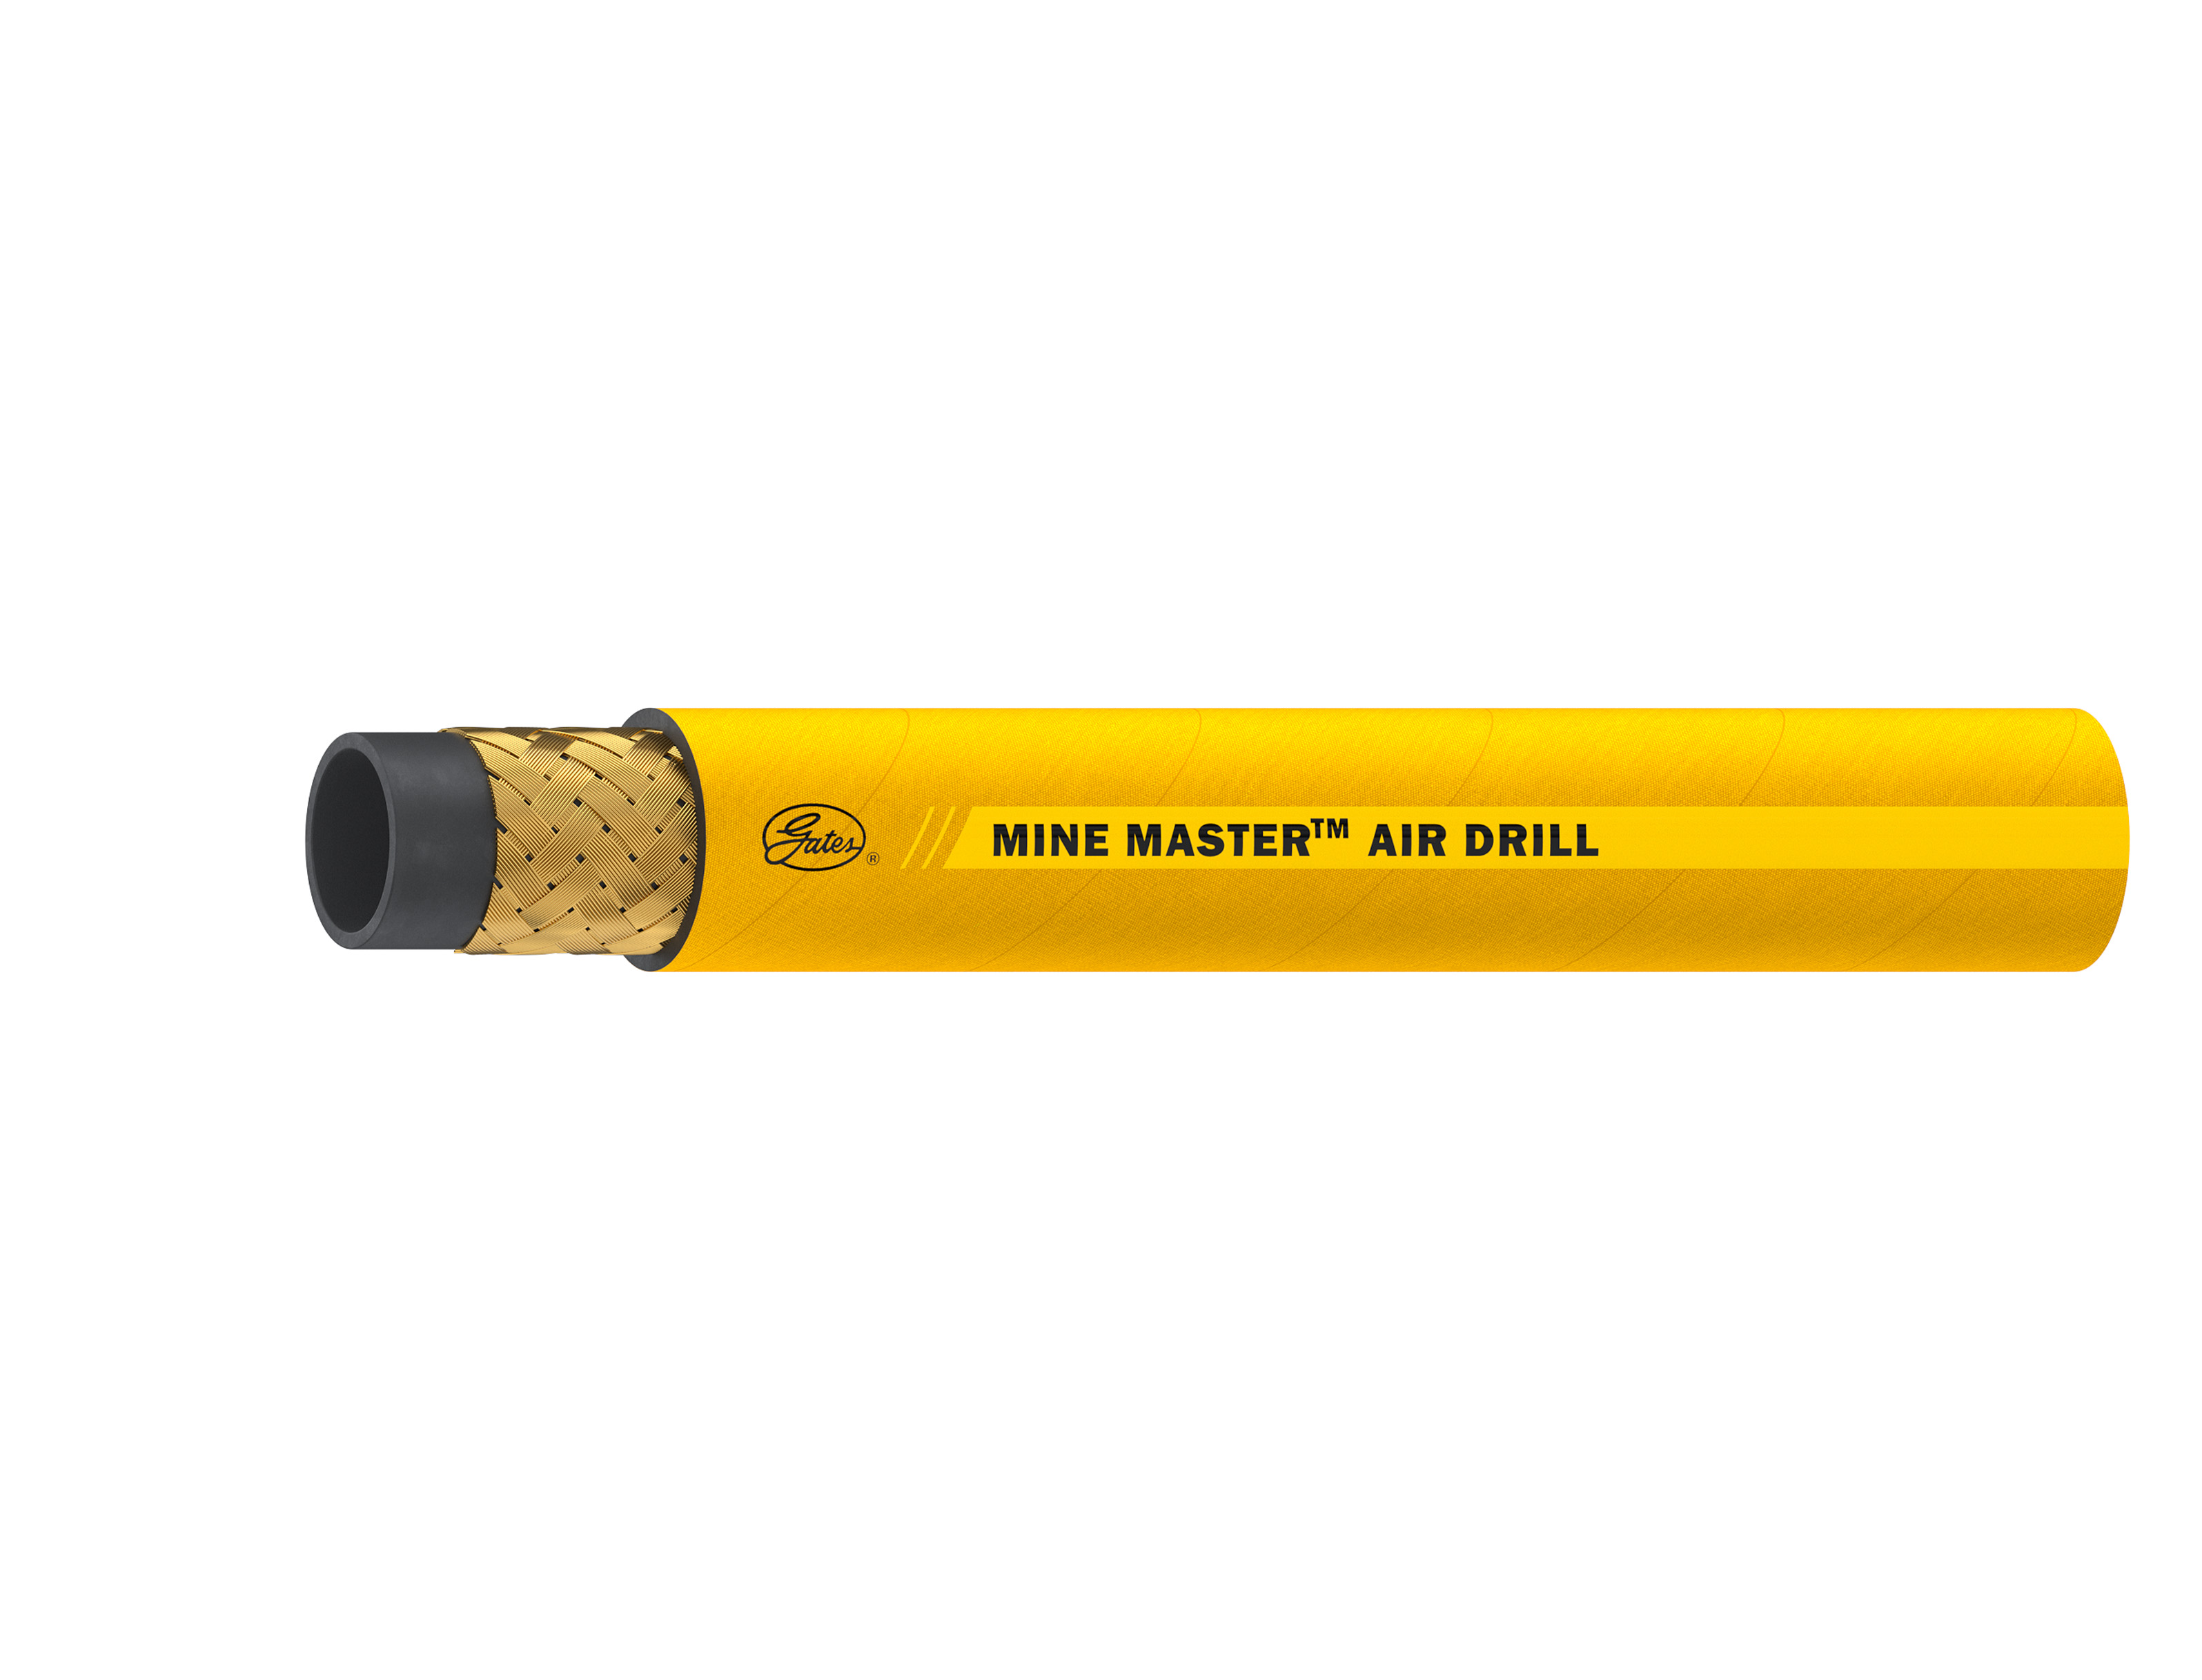 Mine Master Air Drill 500 FR Flame Resistant Hose